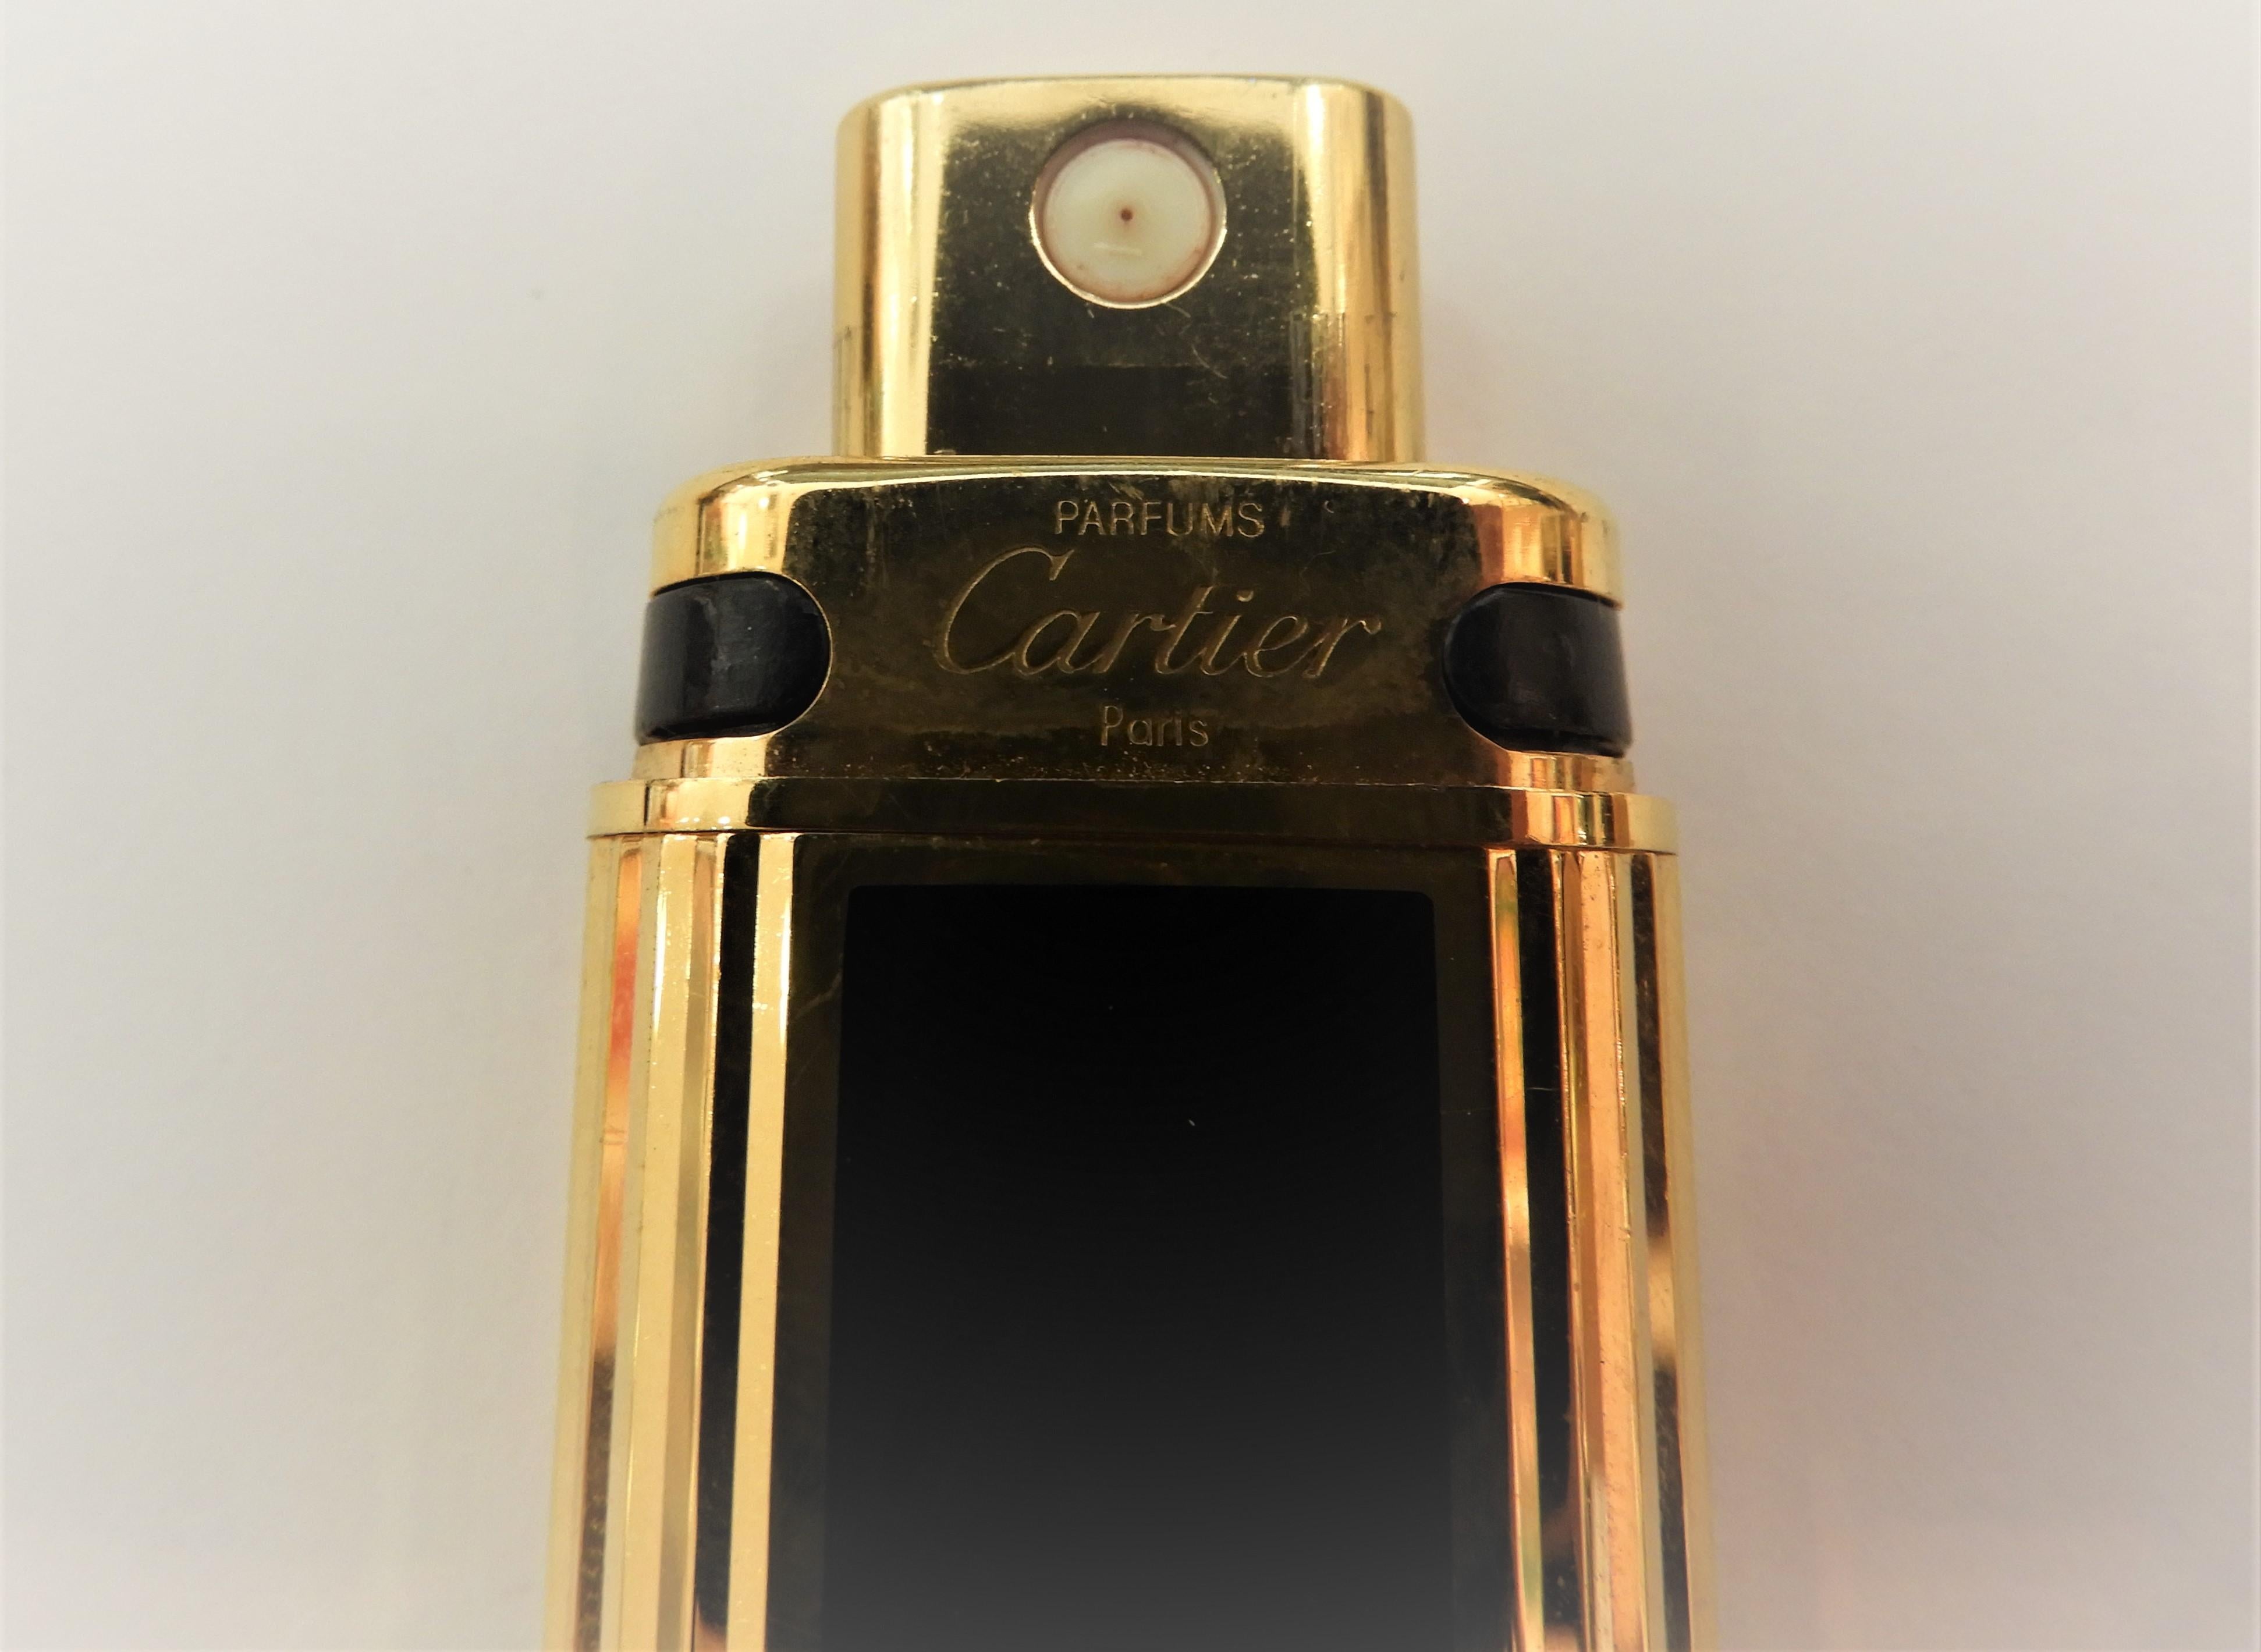 CARTIER NÉCESSAIRES À PARFUM - Pocket Fragance Case   in 18-karat gold-plated and black enamel 
It has an adjustable top lid that houses the Swiss-made mechanism. 
It is marked on its both with cover and base with Cartier 
Dimensions
Height: 4 in.